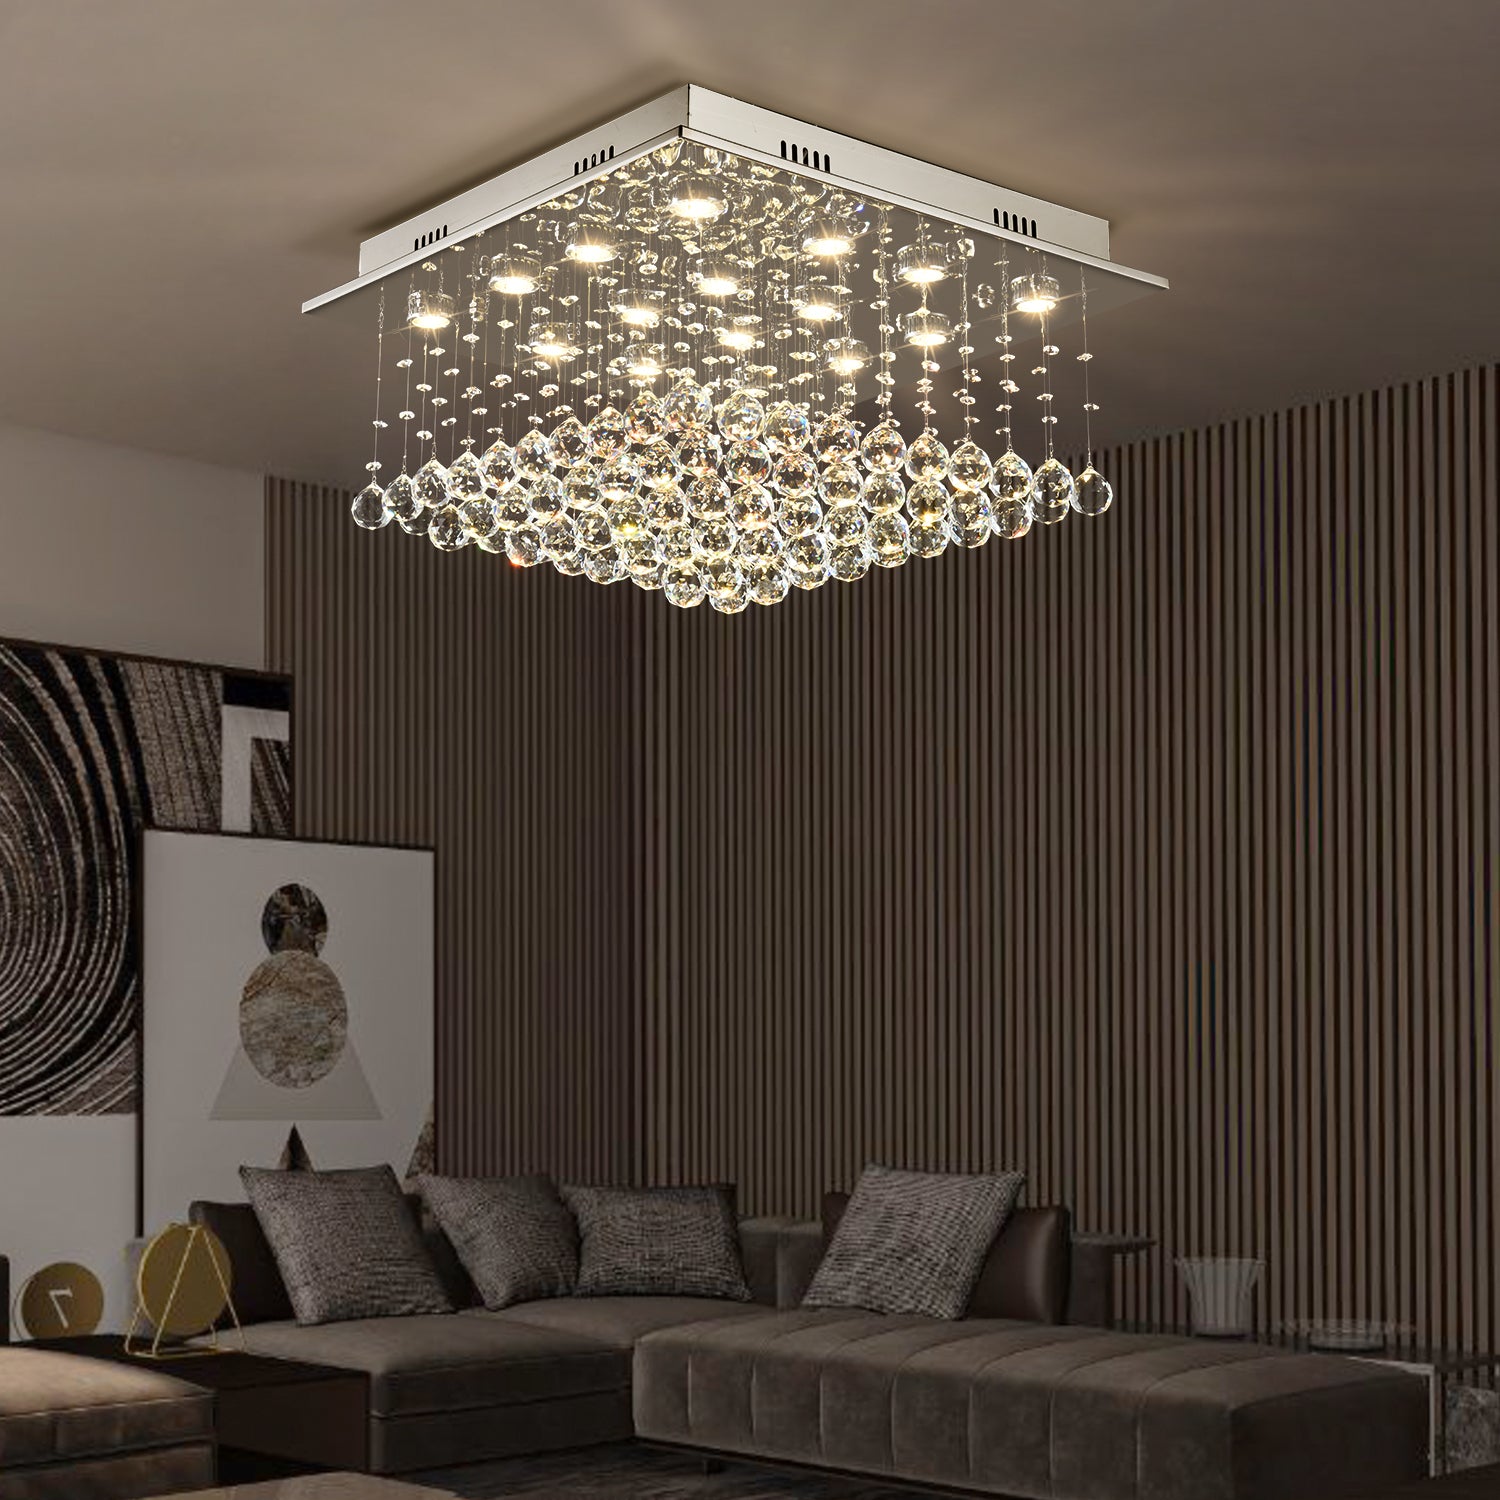 Square Raindrop Design Crystal Chandelier With Cold Light - Living Room| Sofary